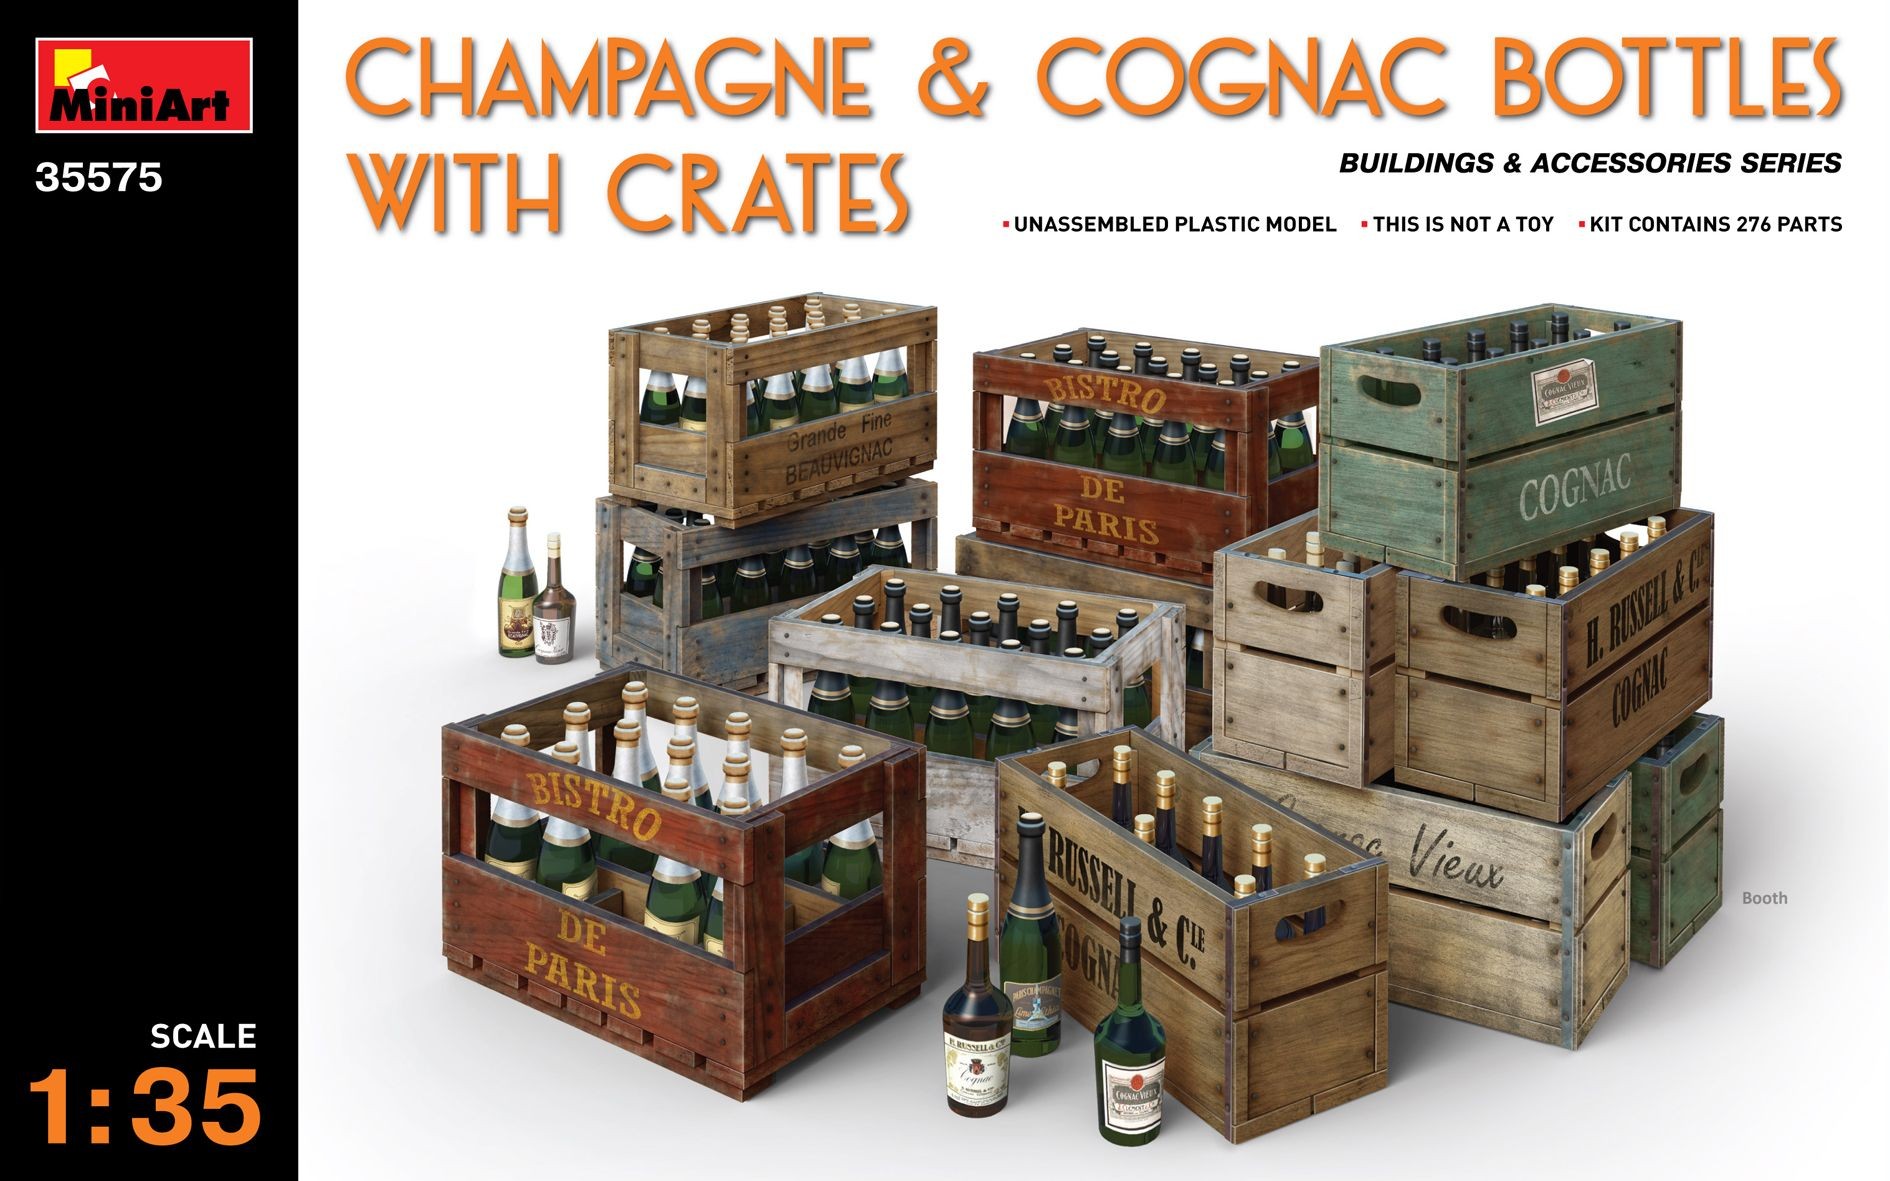 Champagne & Cognac Bottles with Crates